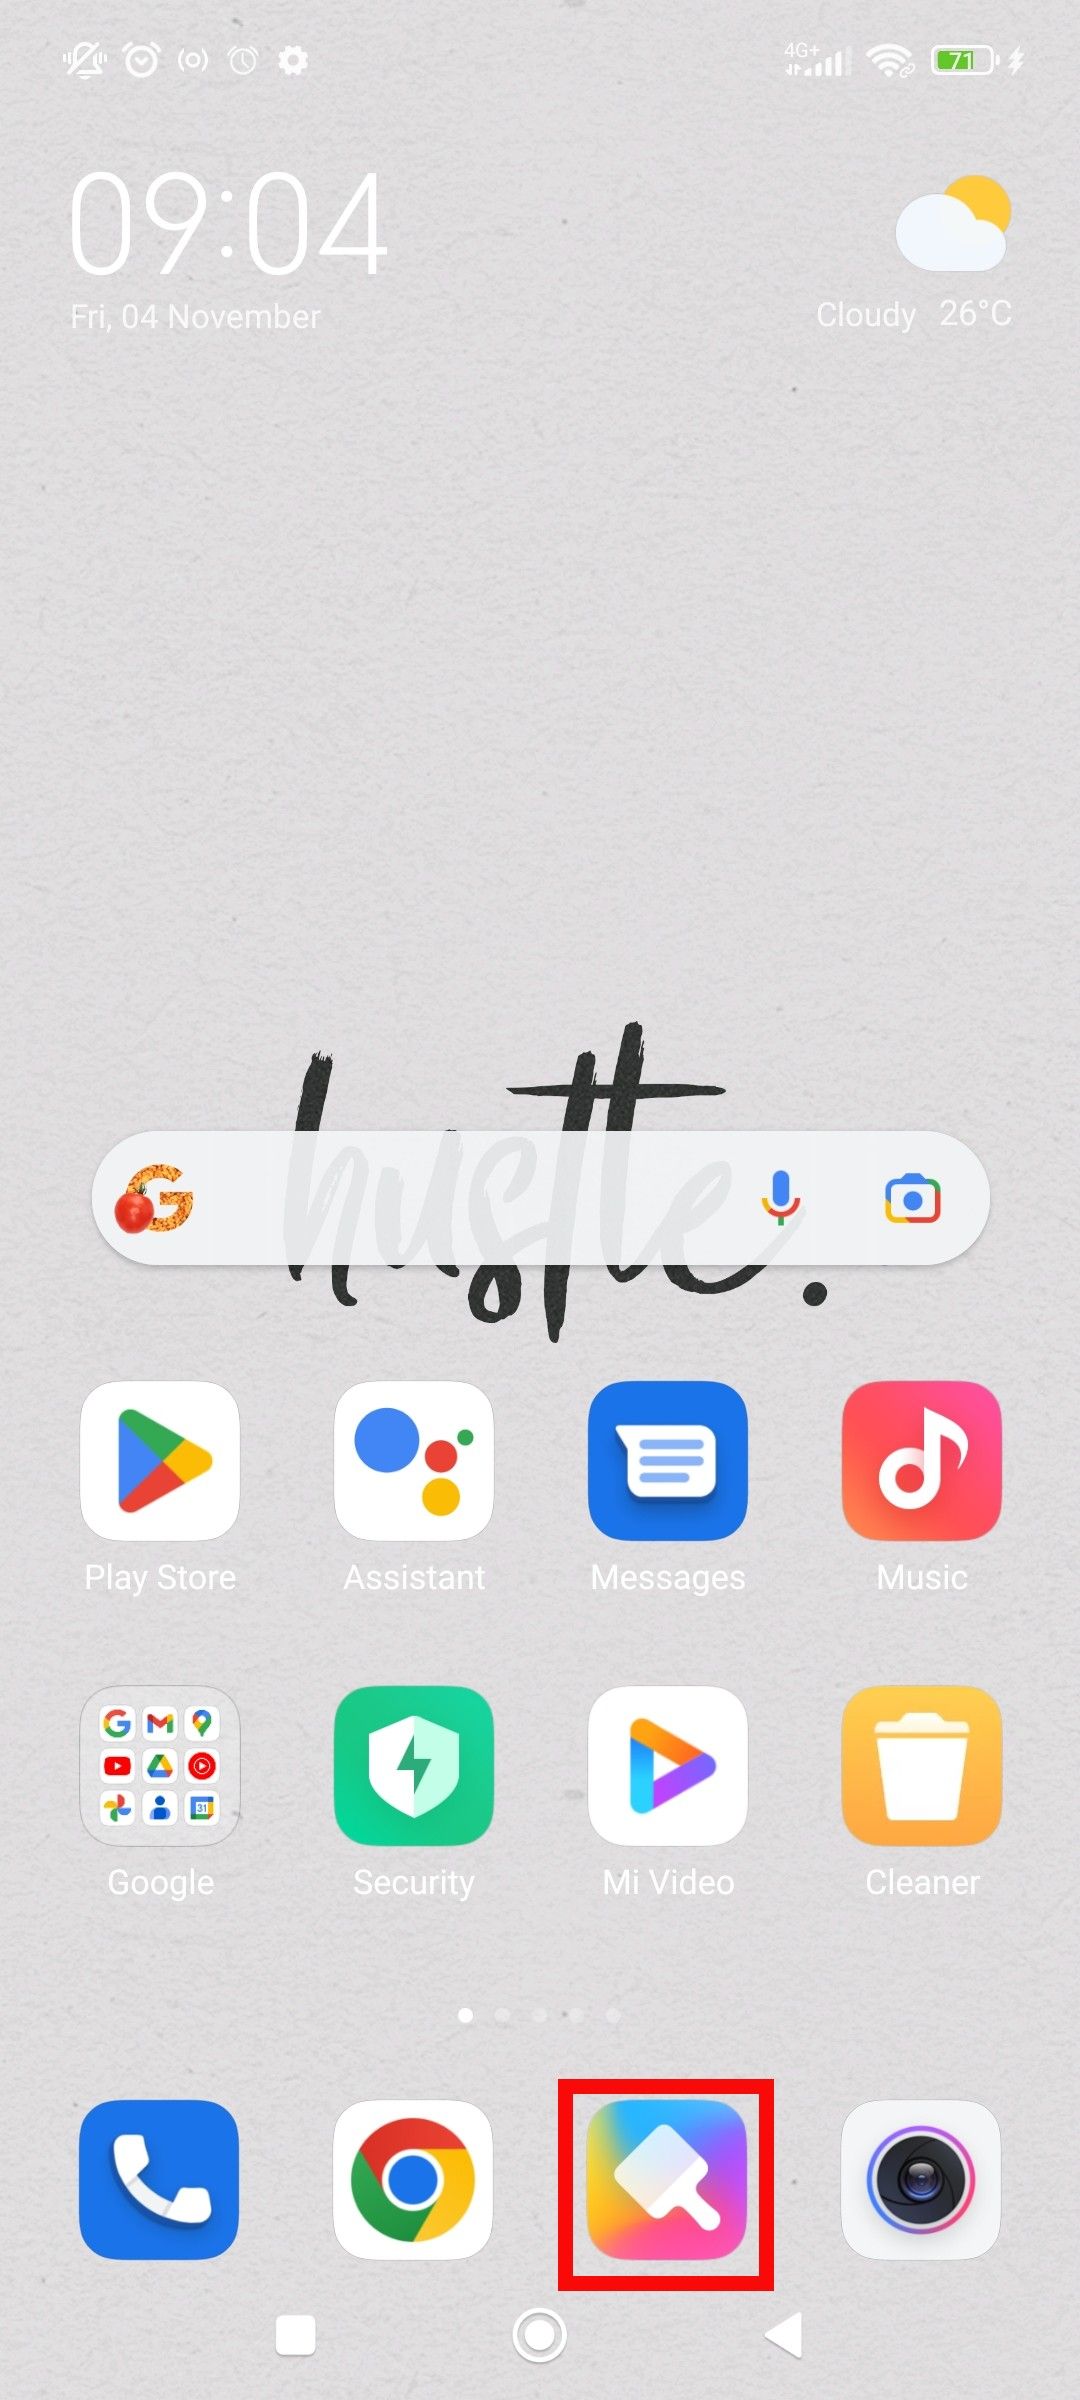 Xiaomi home screen outlining the Themes app icon